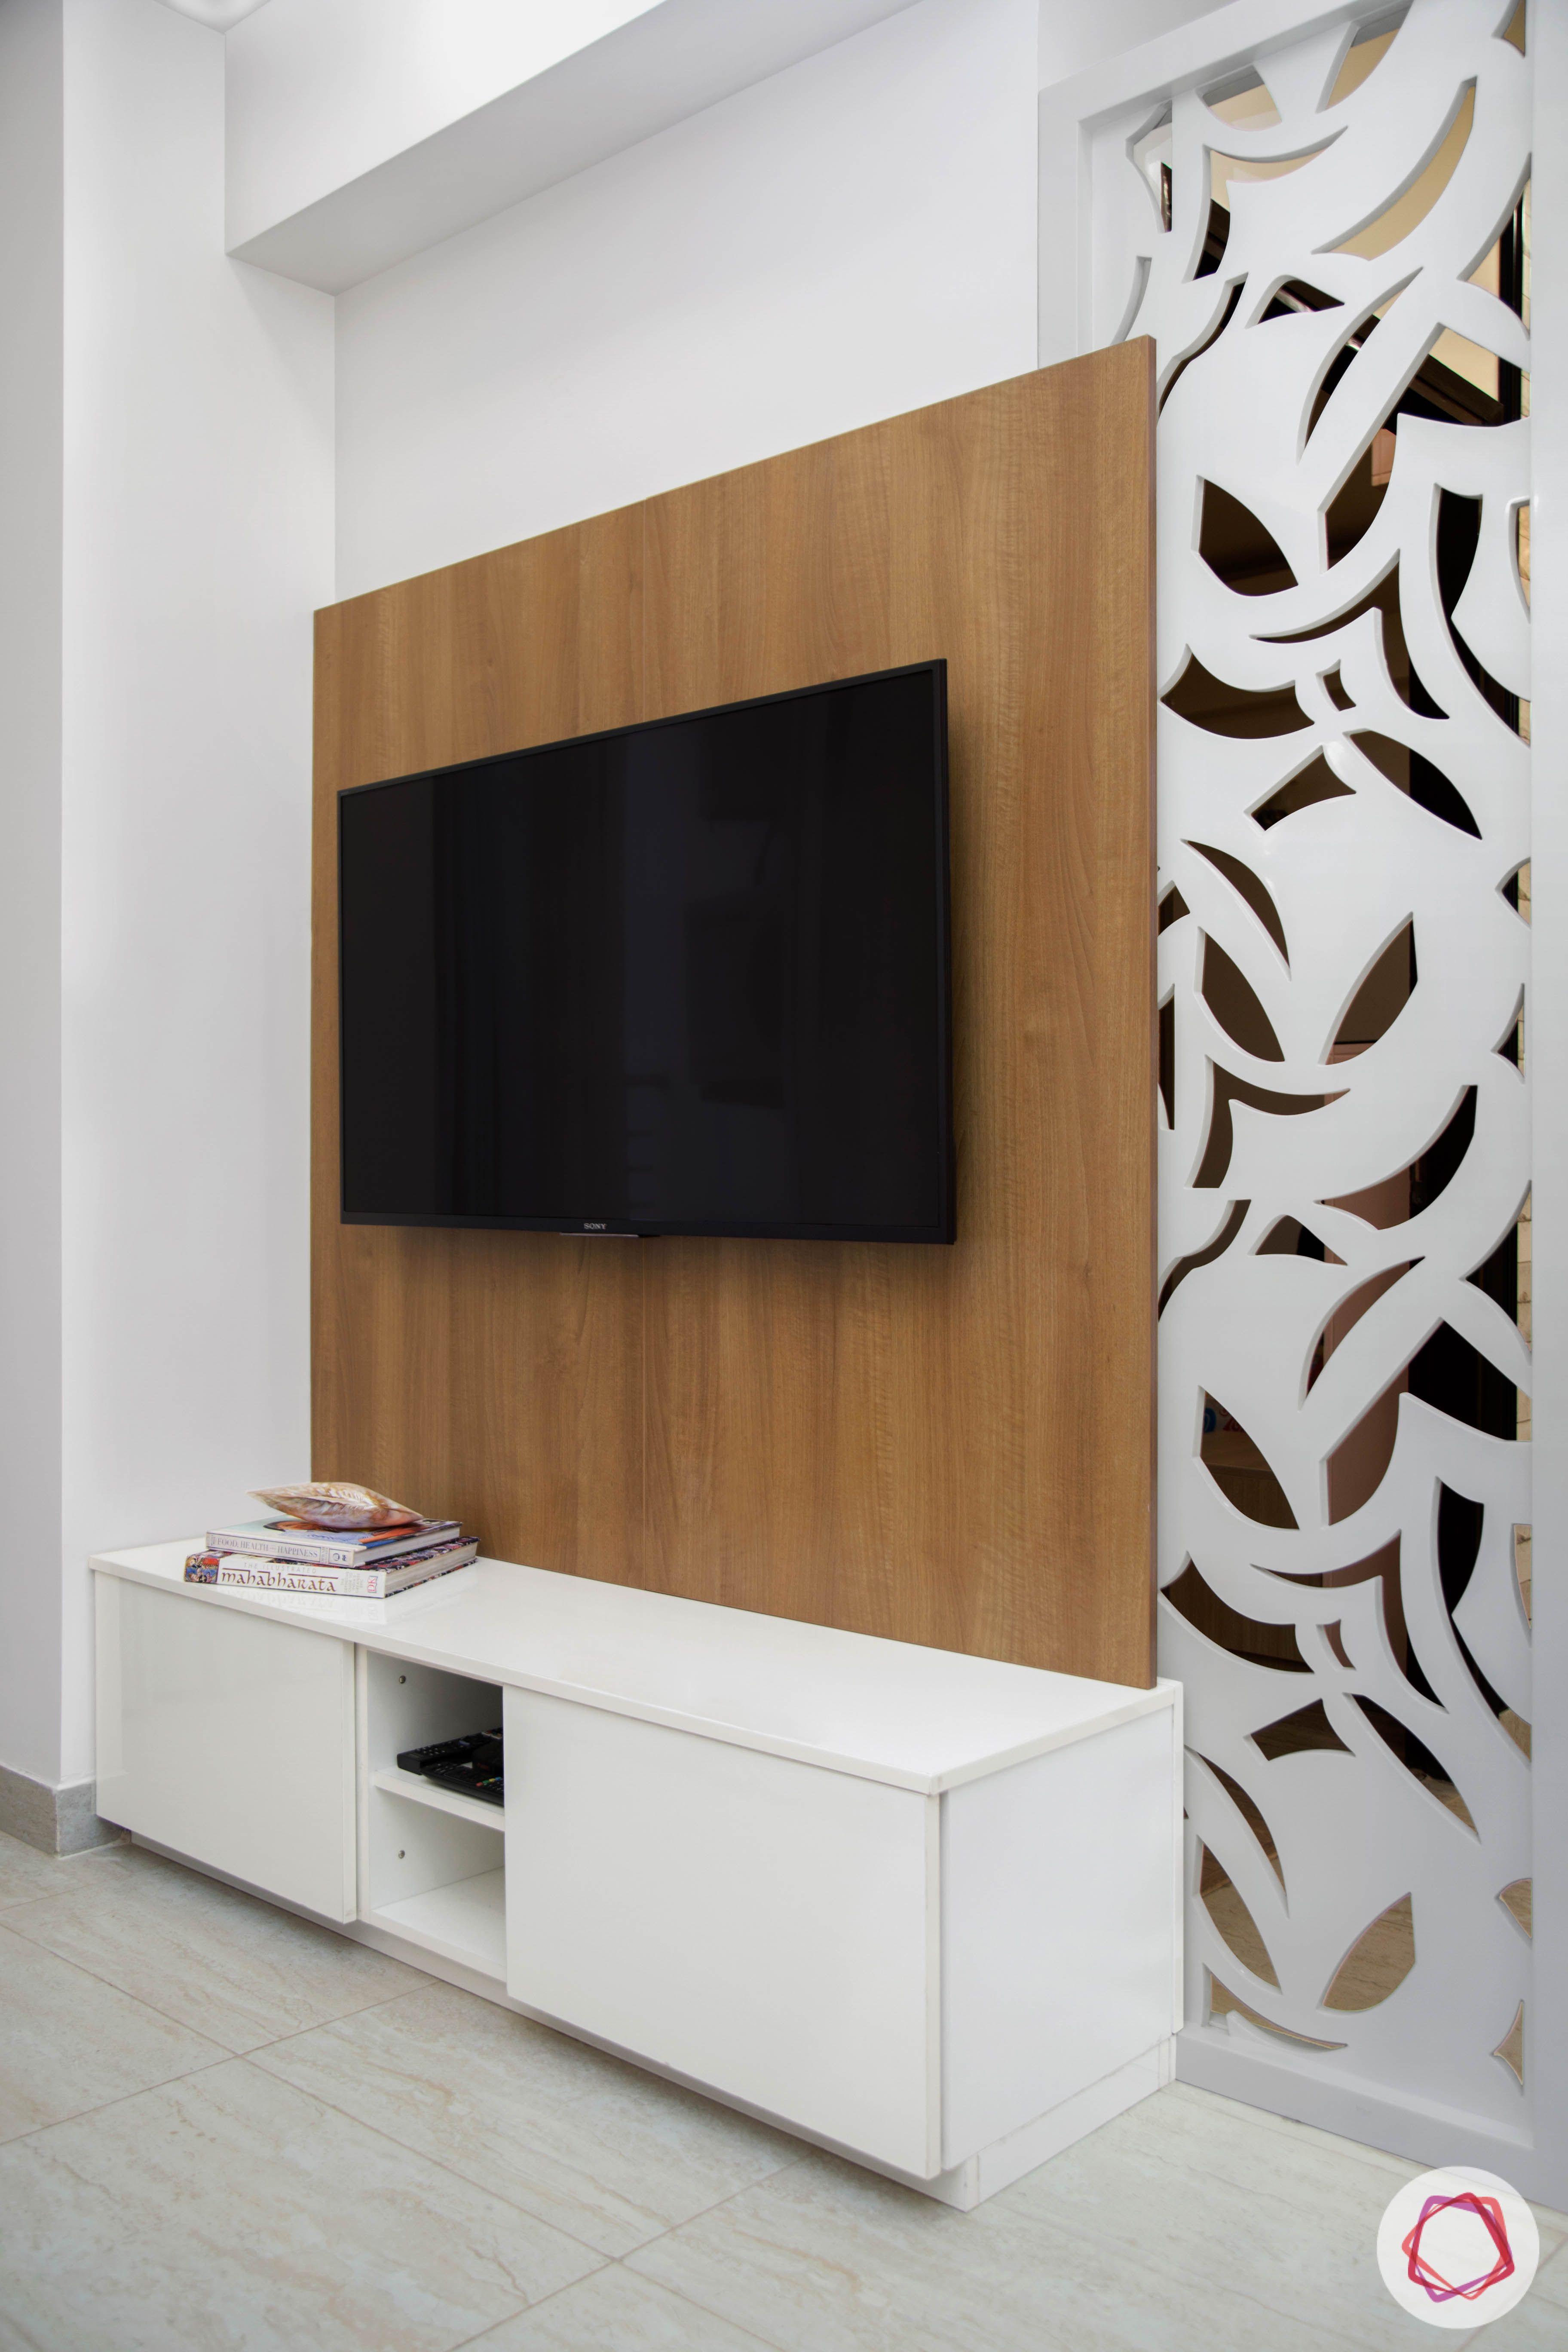 Cleo county noida_living room with laminate tv unit and jaali divider